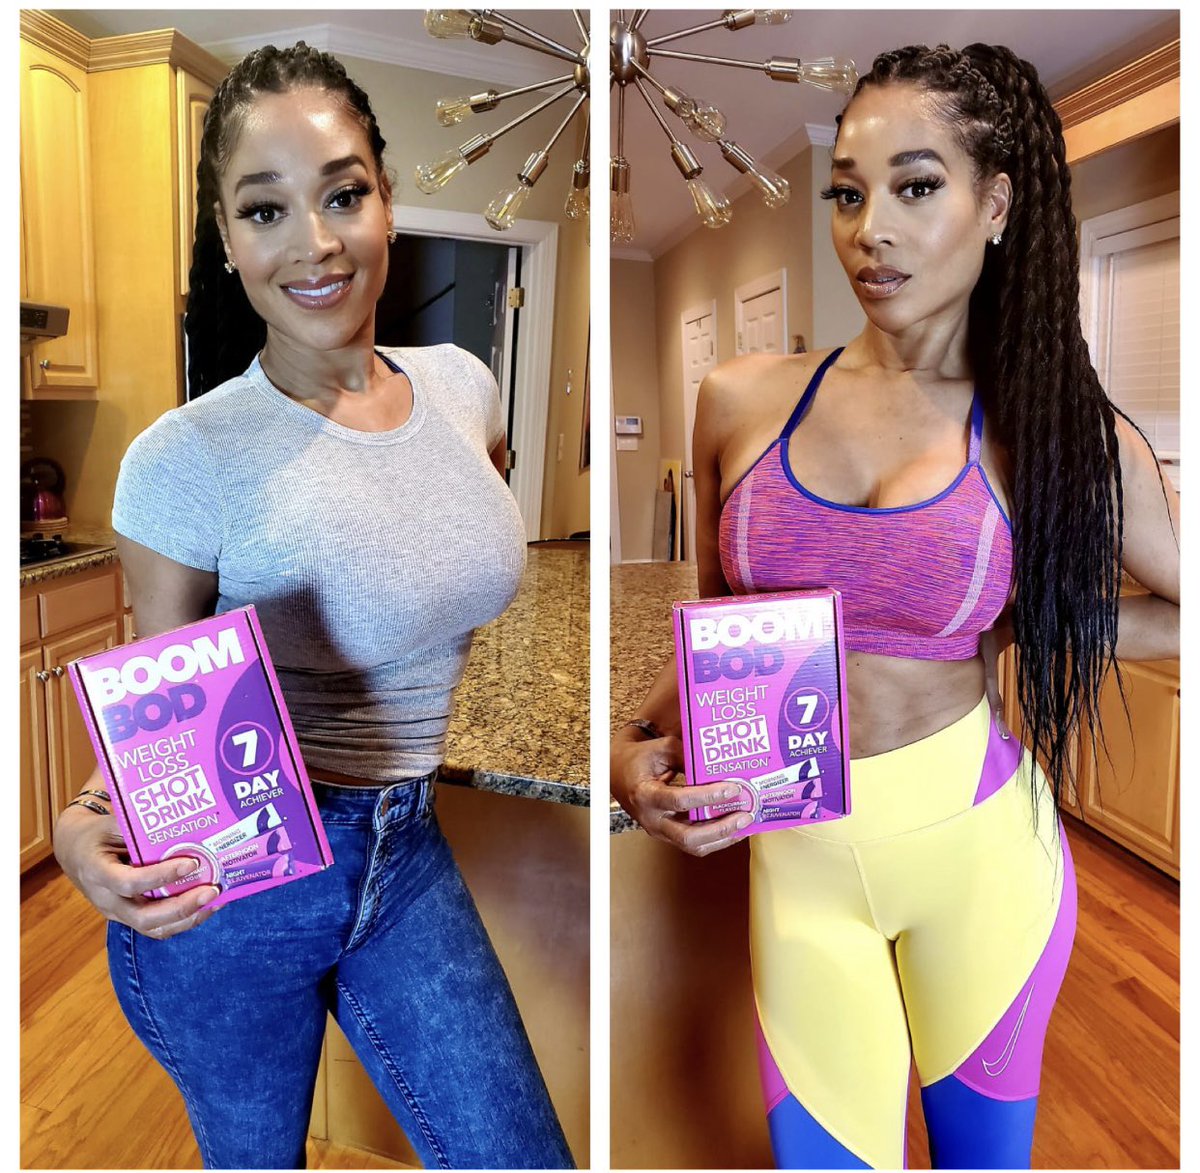 The results don’t lie 🔥 @boombod is exactly what I needed to kick these holiday cravings. There has been sooo many sweets and treats around every corner 👀 These little shots really do the trick! Grab some now for BOGO Free at boombod.com #boombodpartner